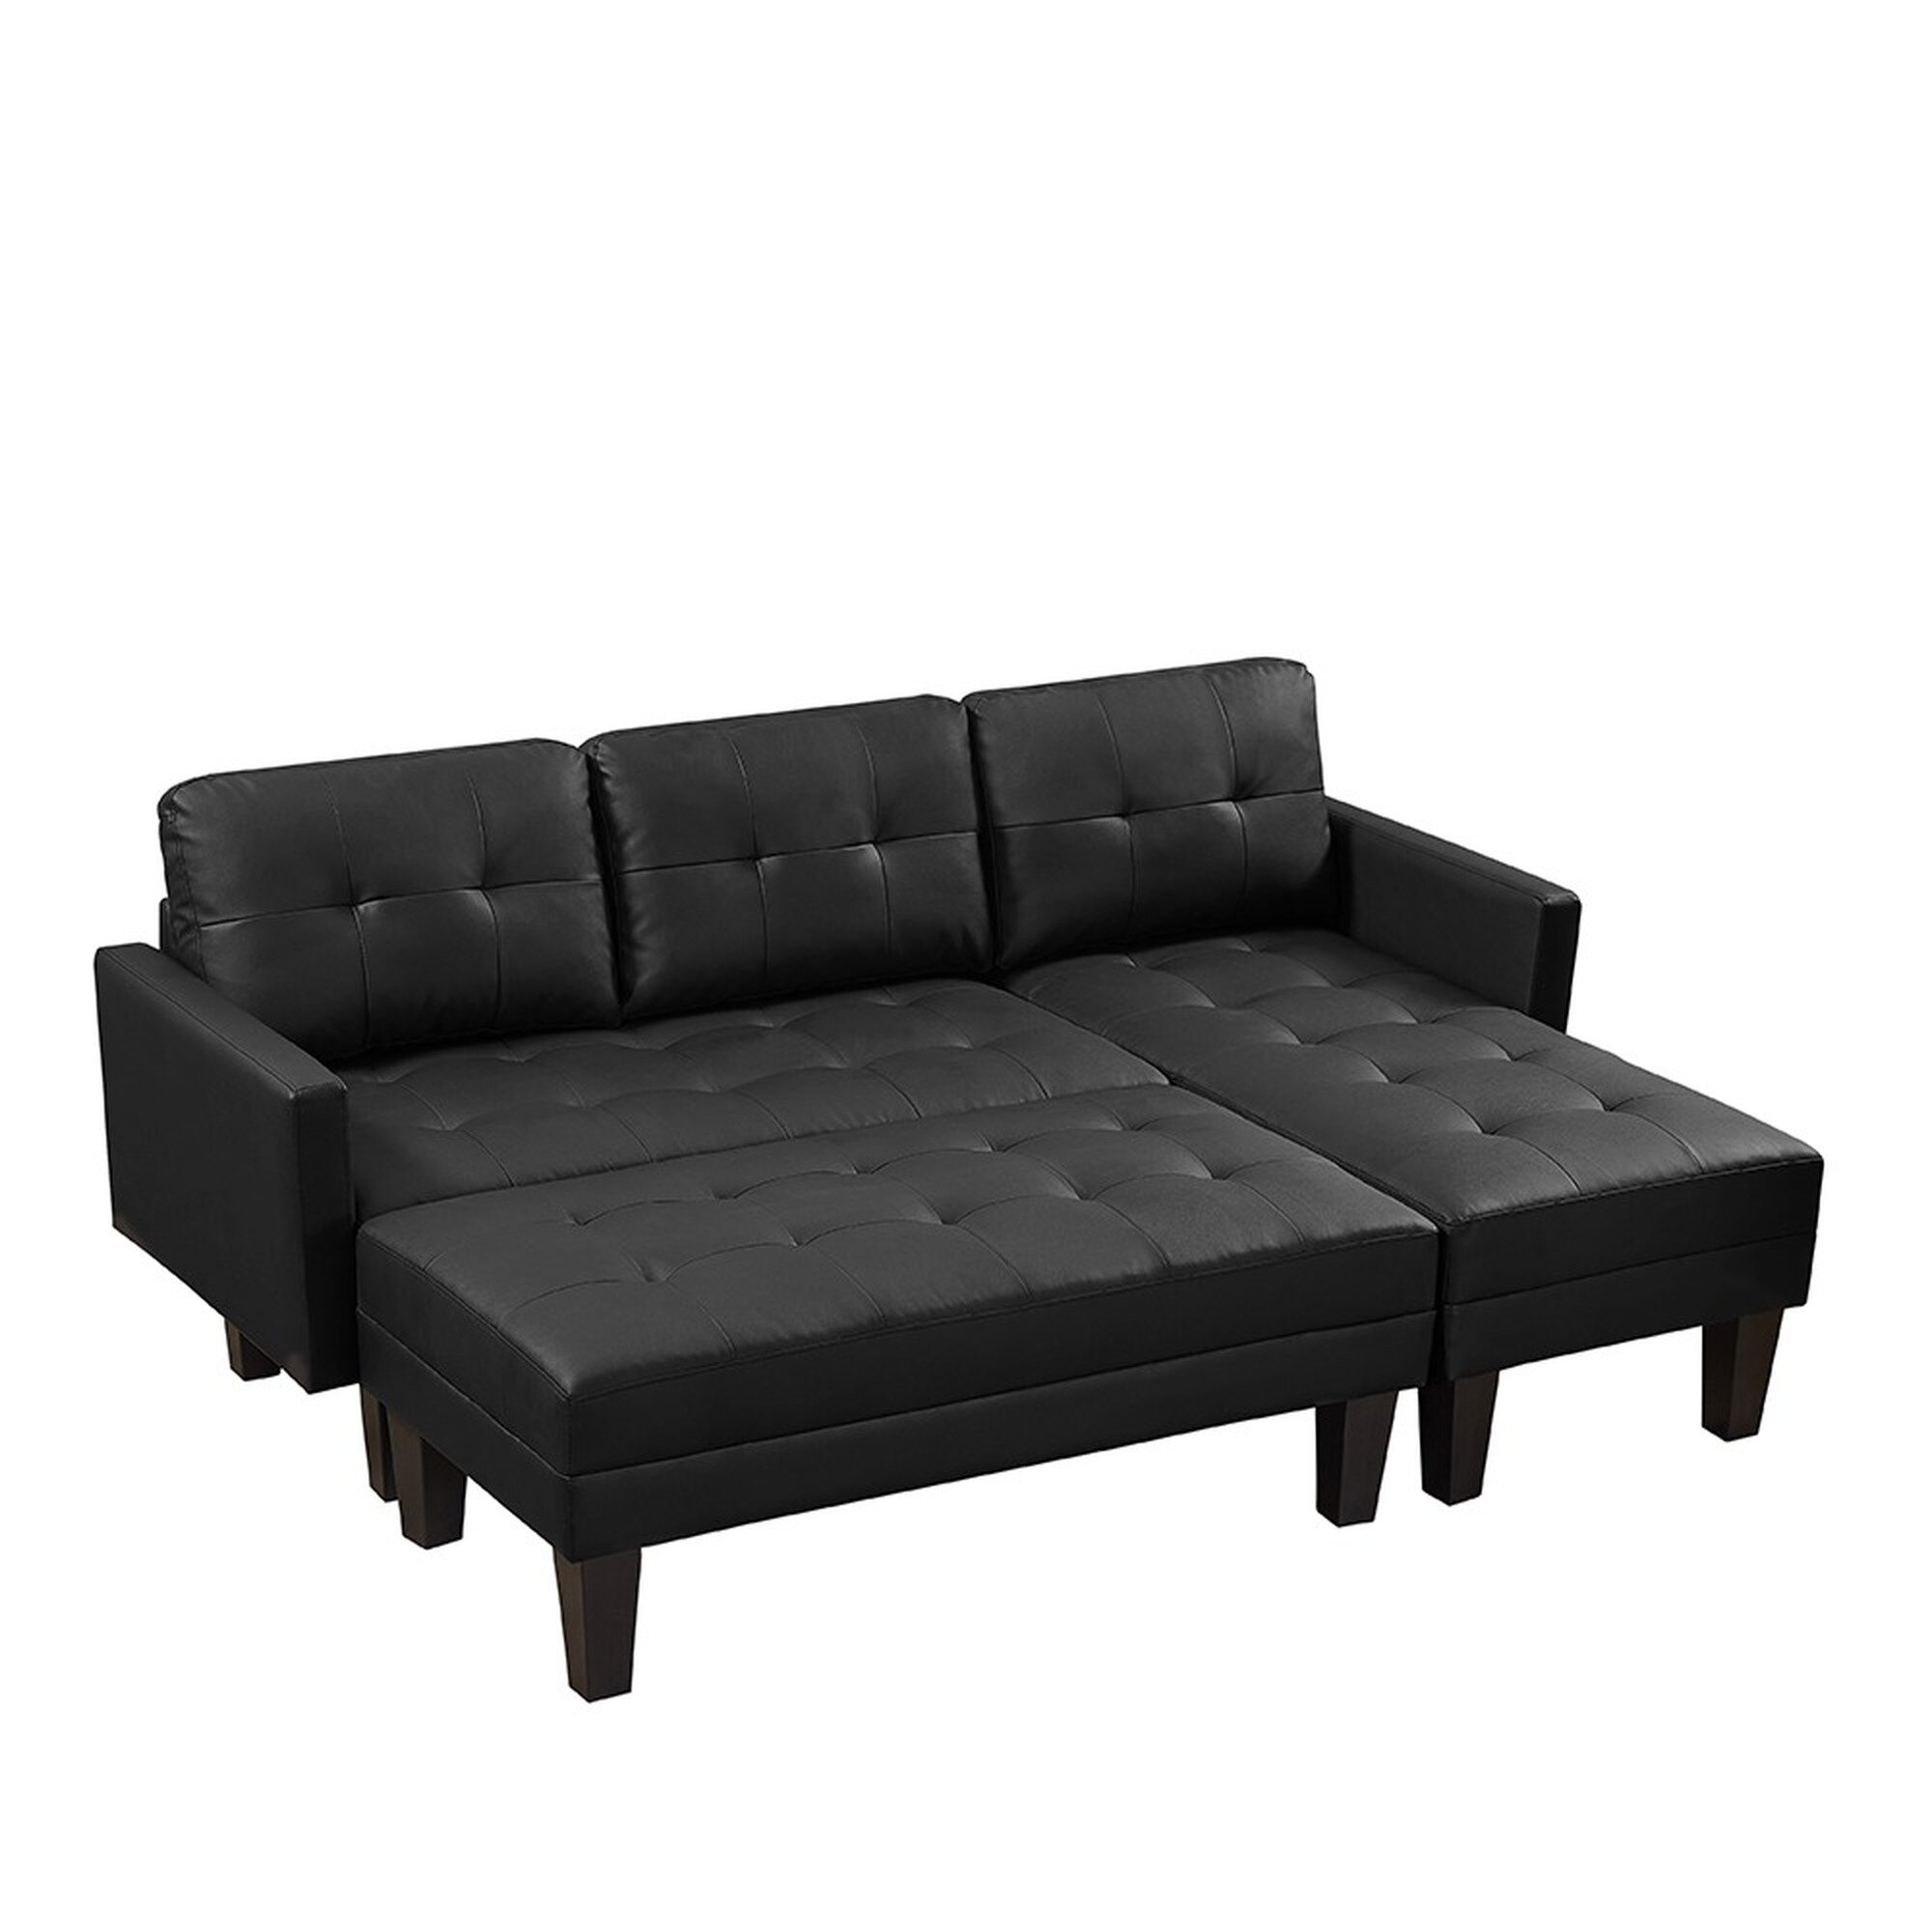 Details about   Modern Futon Sofa Bed Faux Leather Couch Fold Up & Down Recliner with Cup Holder 